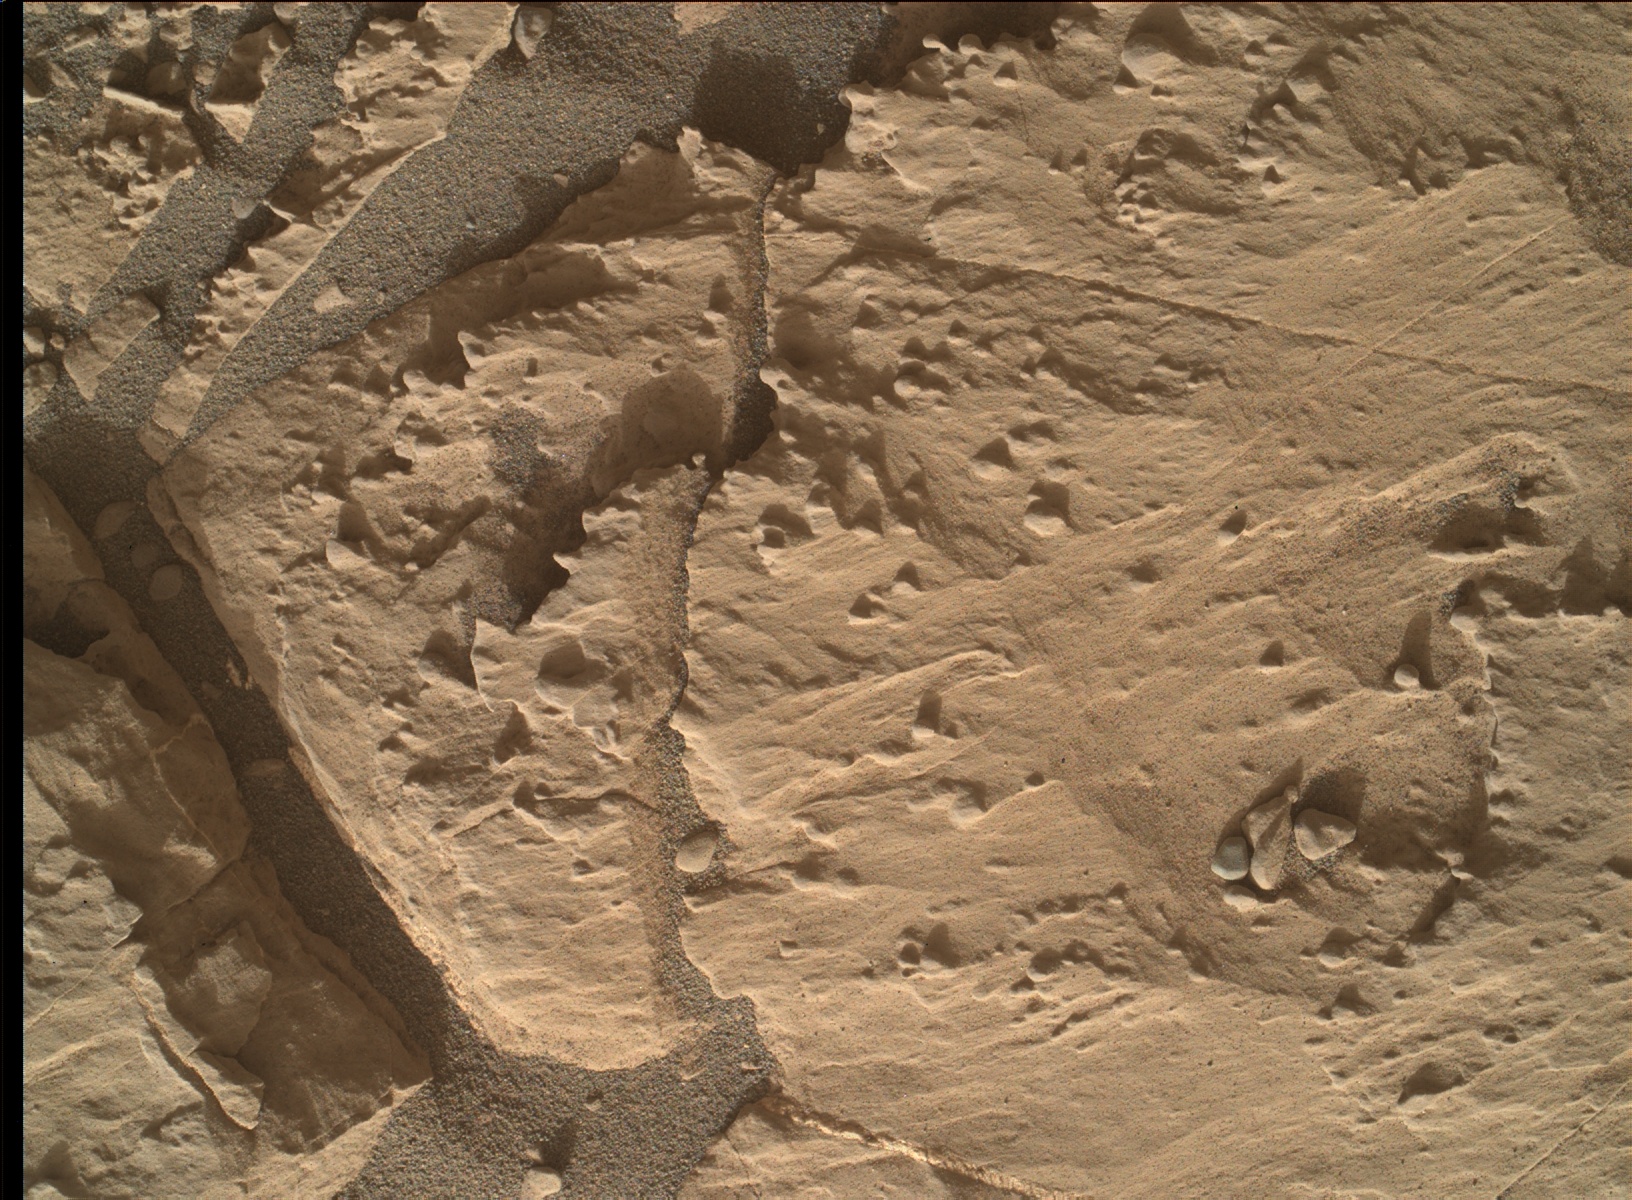 Nasa's Mars rover Curiosity acquired this image using its Mars Hand Lens Imager (MAHLI) on Sol 1824